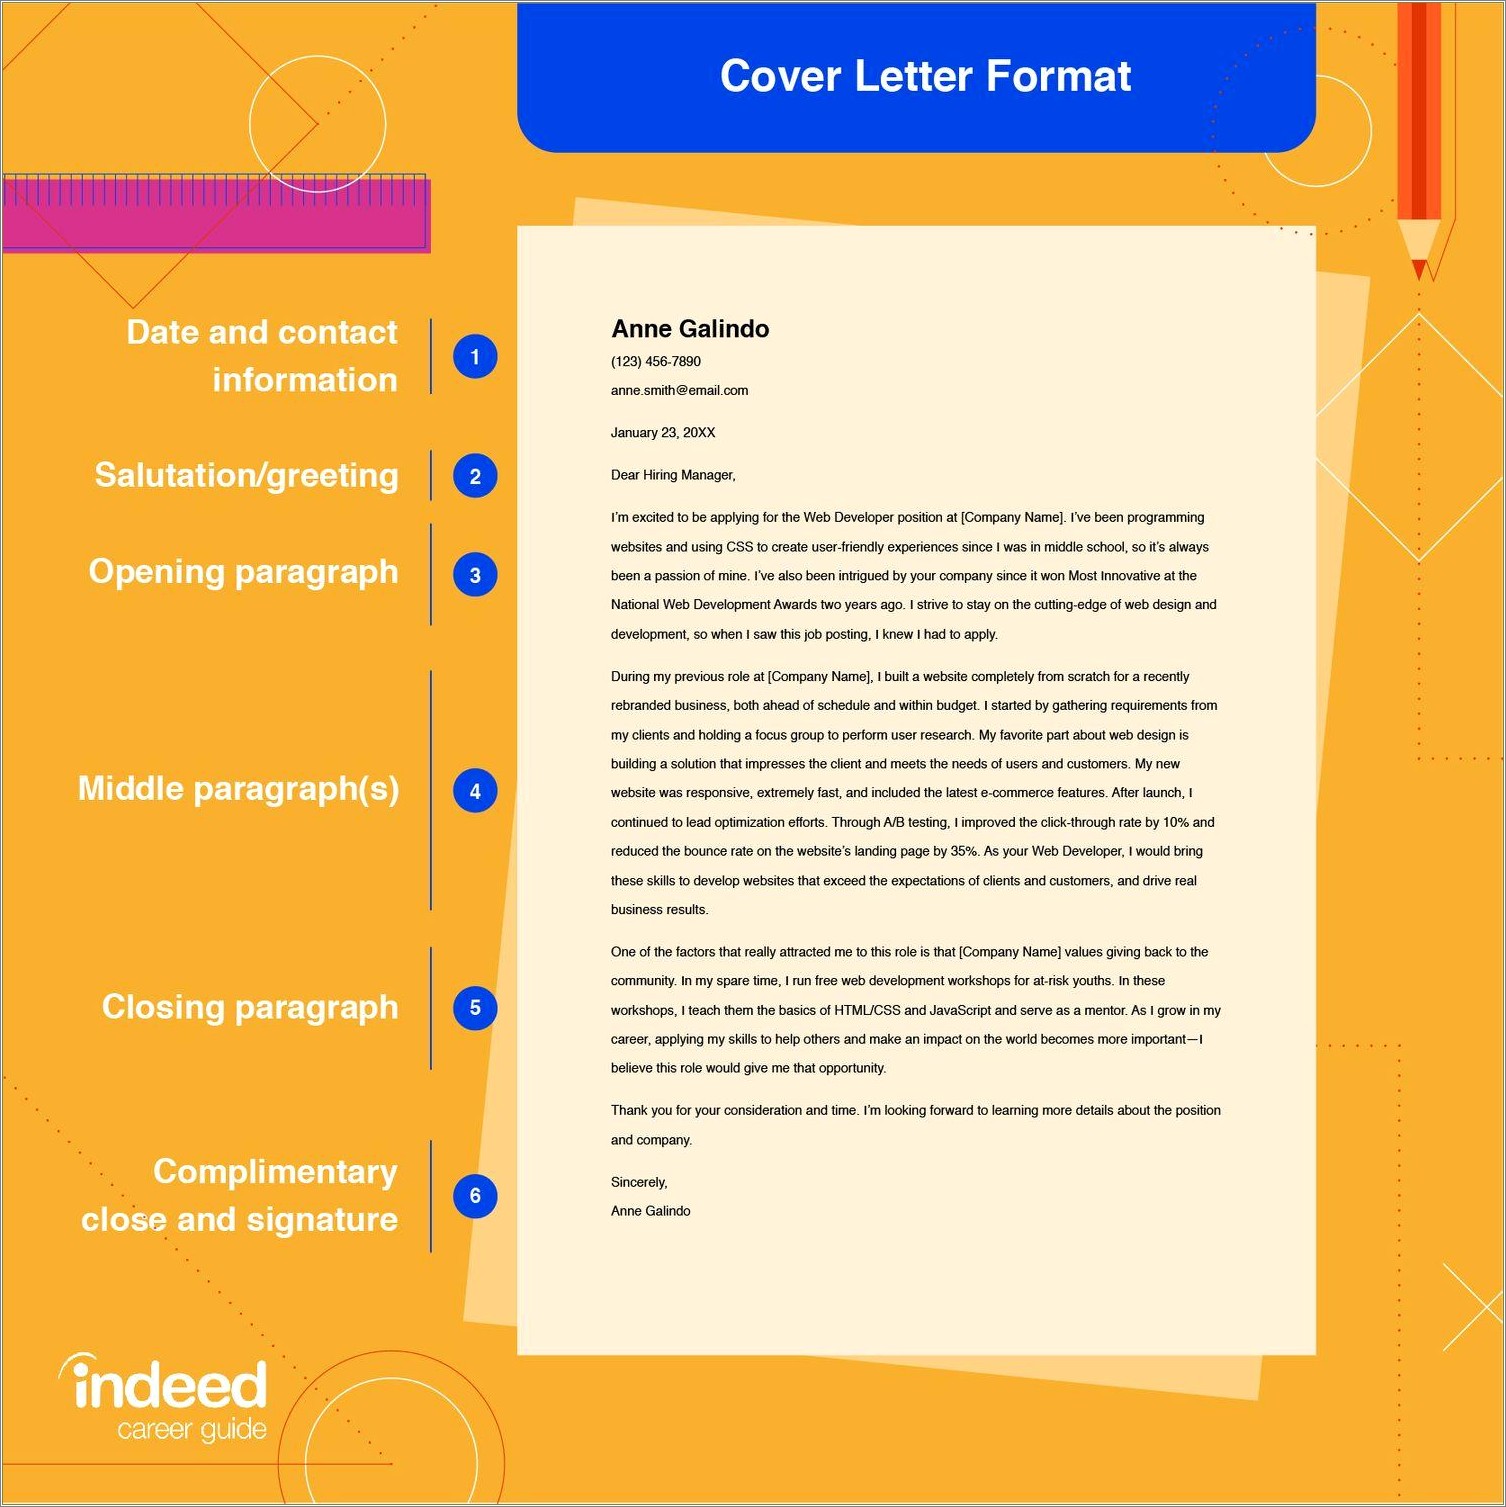 Sample Email To Send Cover Letter And Resume